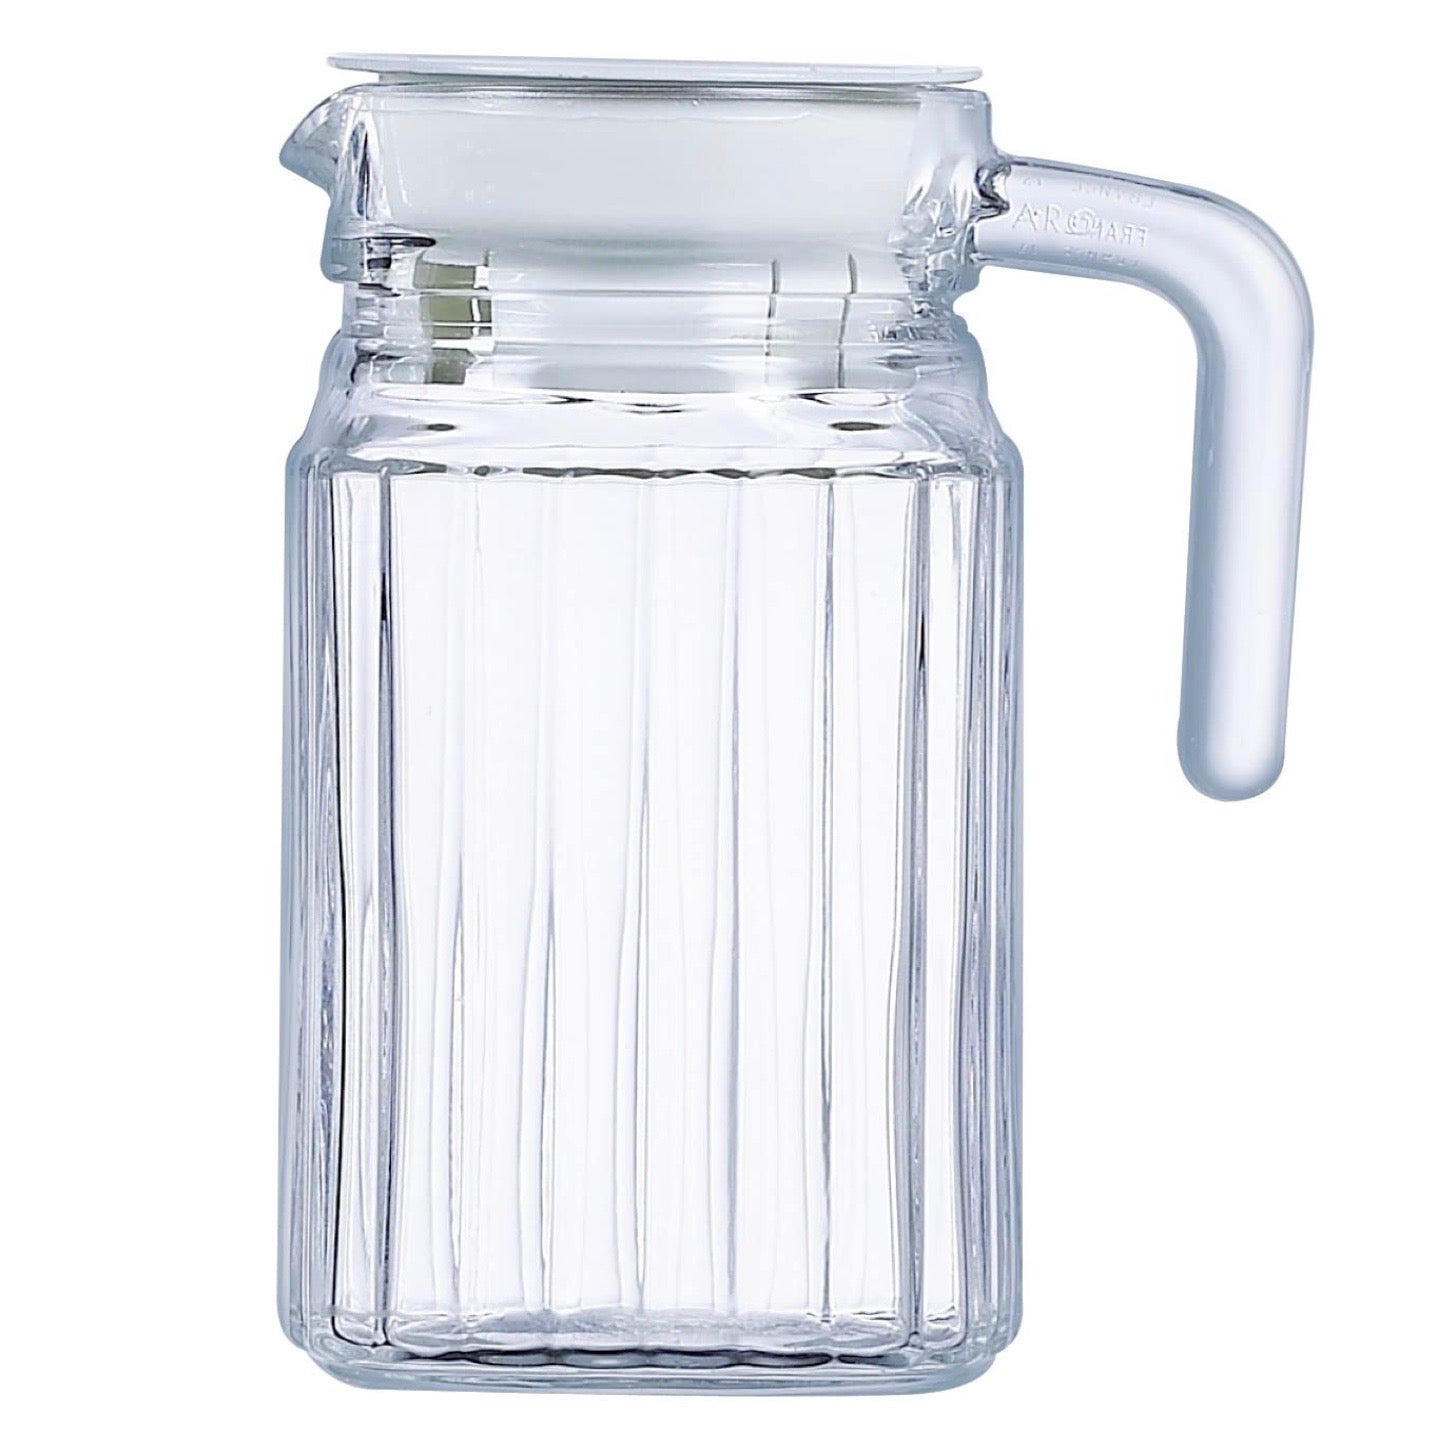 This Kitschy-Cool $15 Pitcher Is Amazon’s Best-Kept Secret